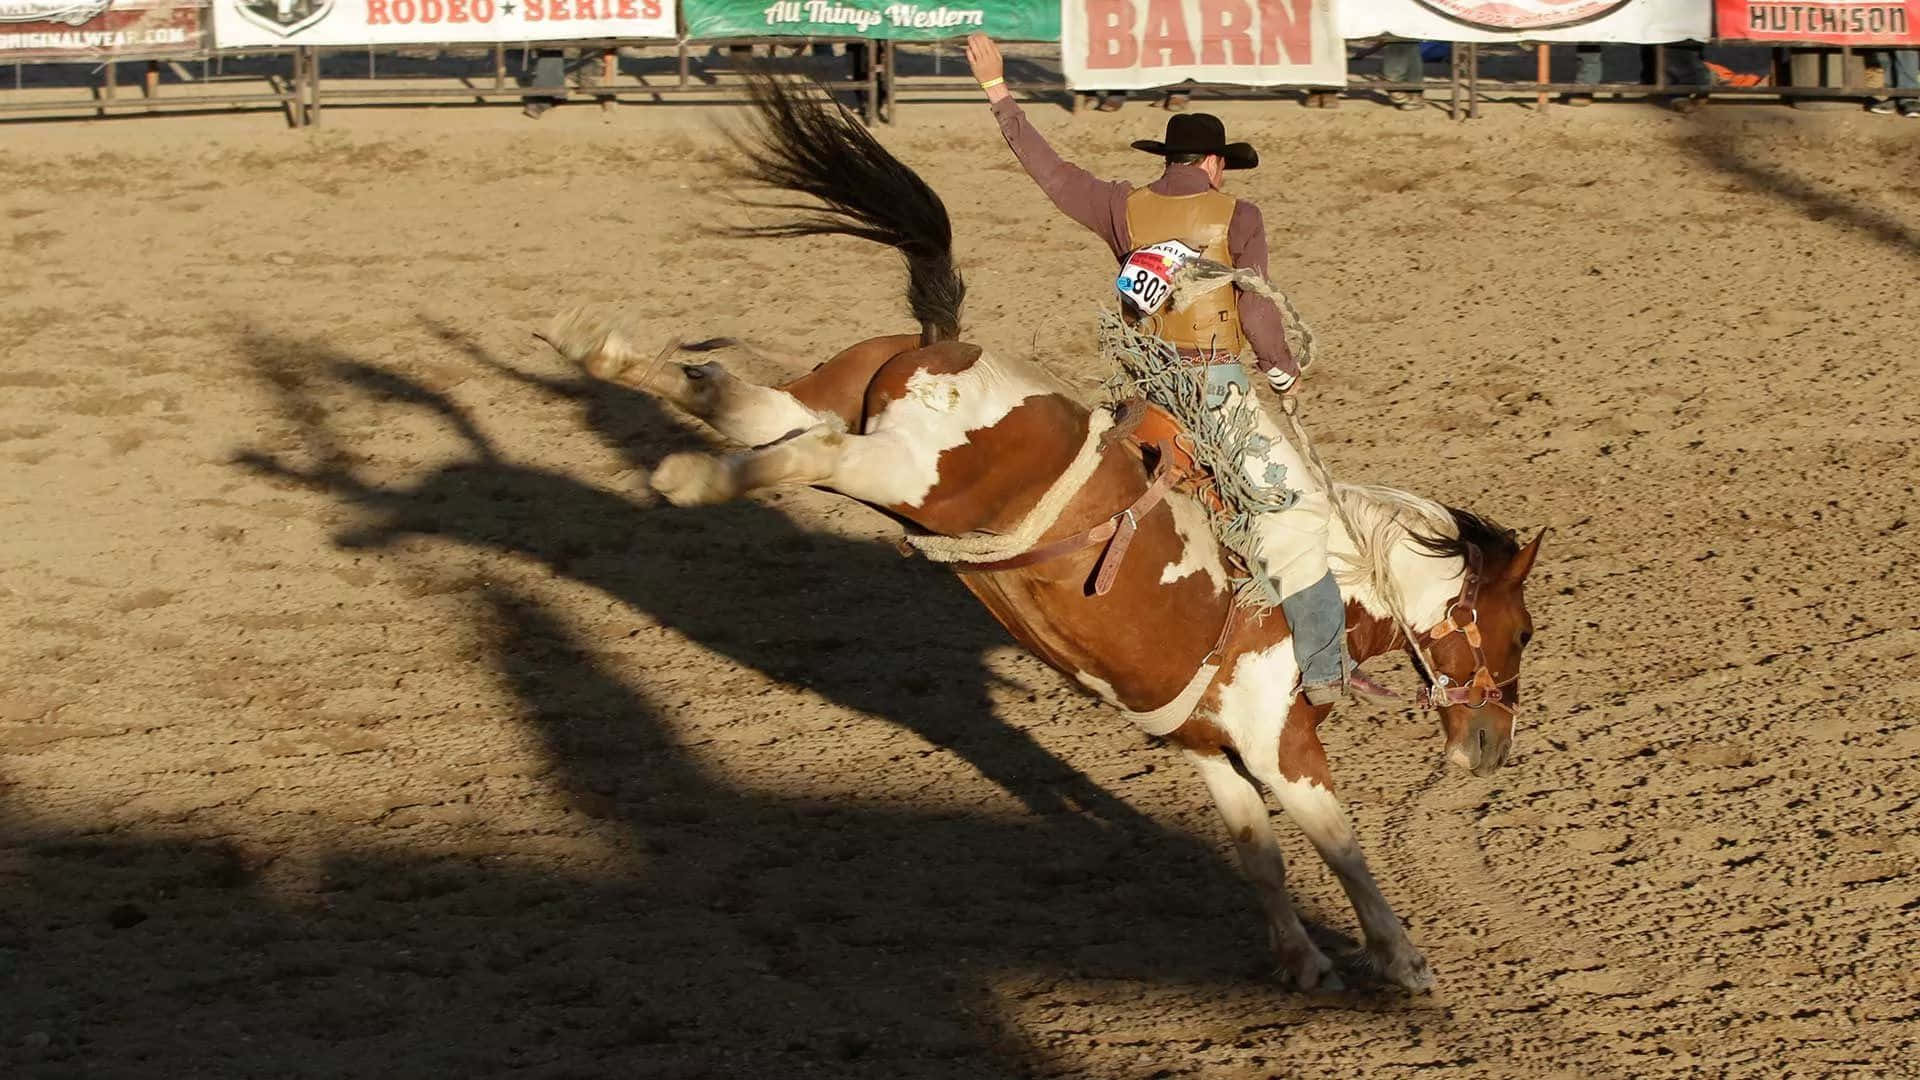 Cowboy rides bronco during rodeo show Wallpaper